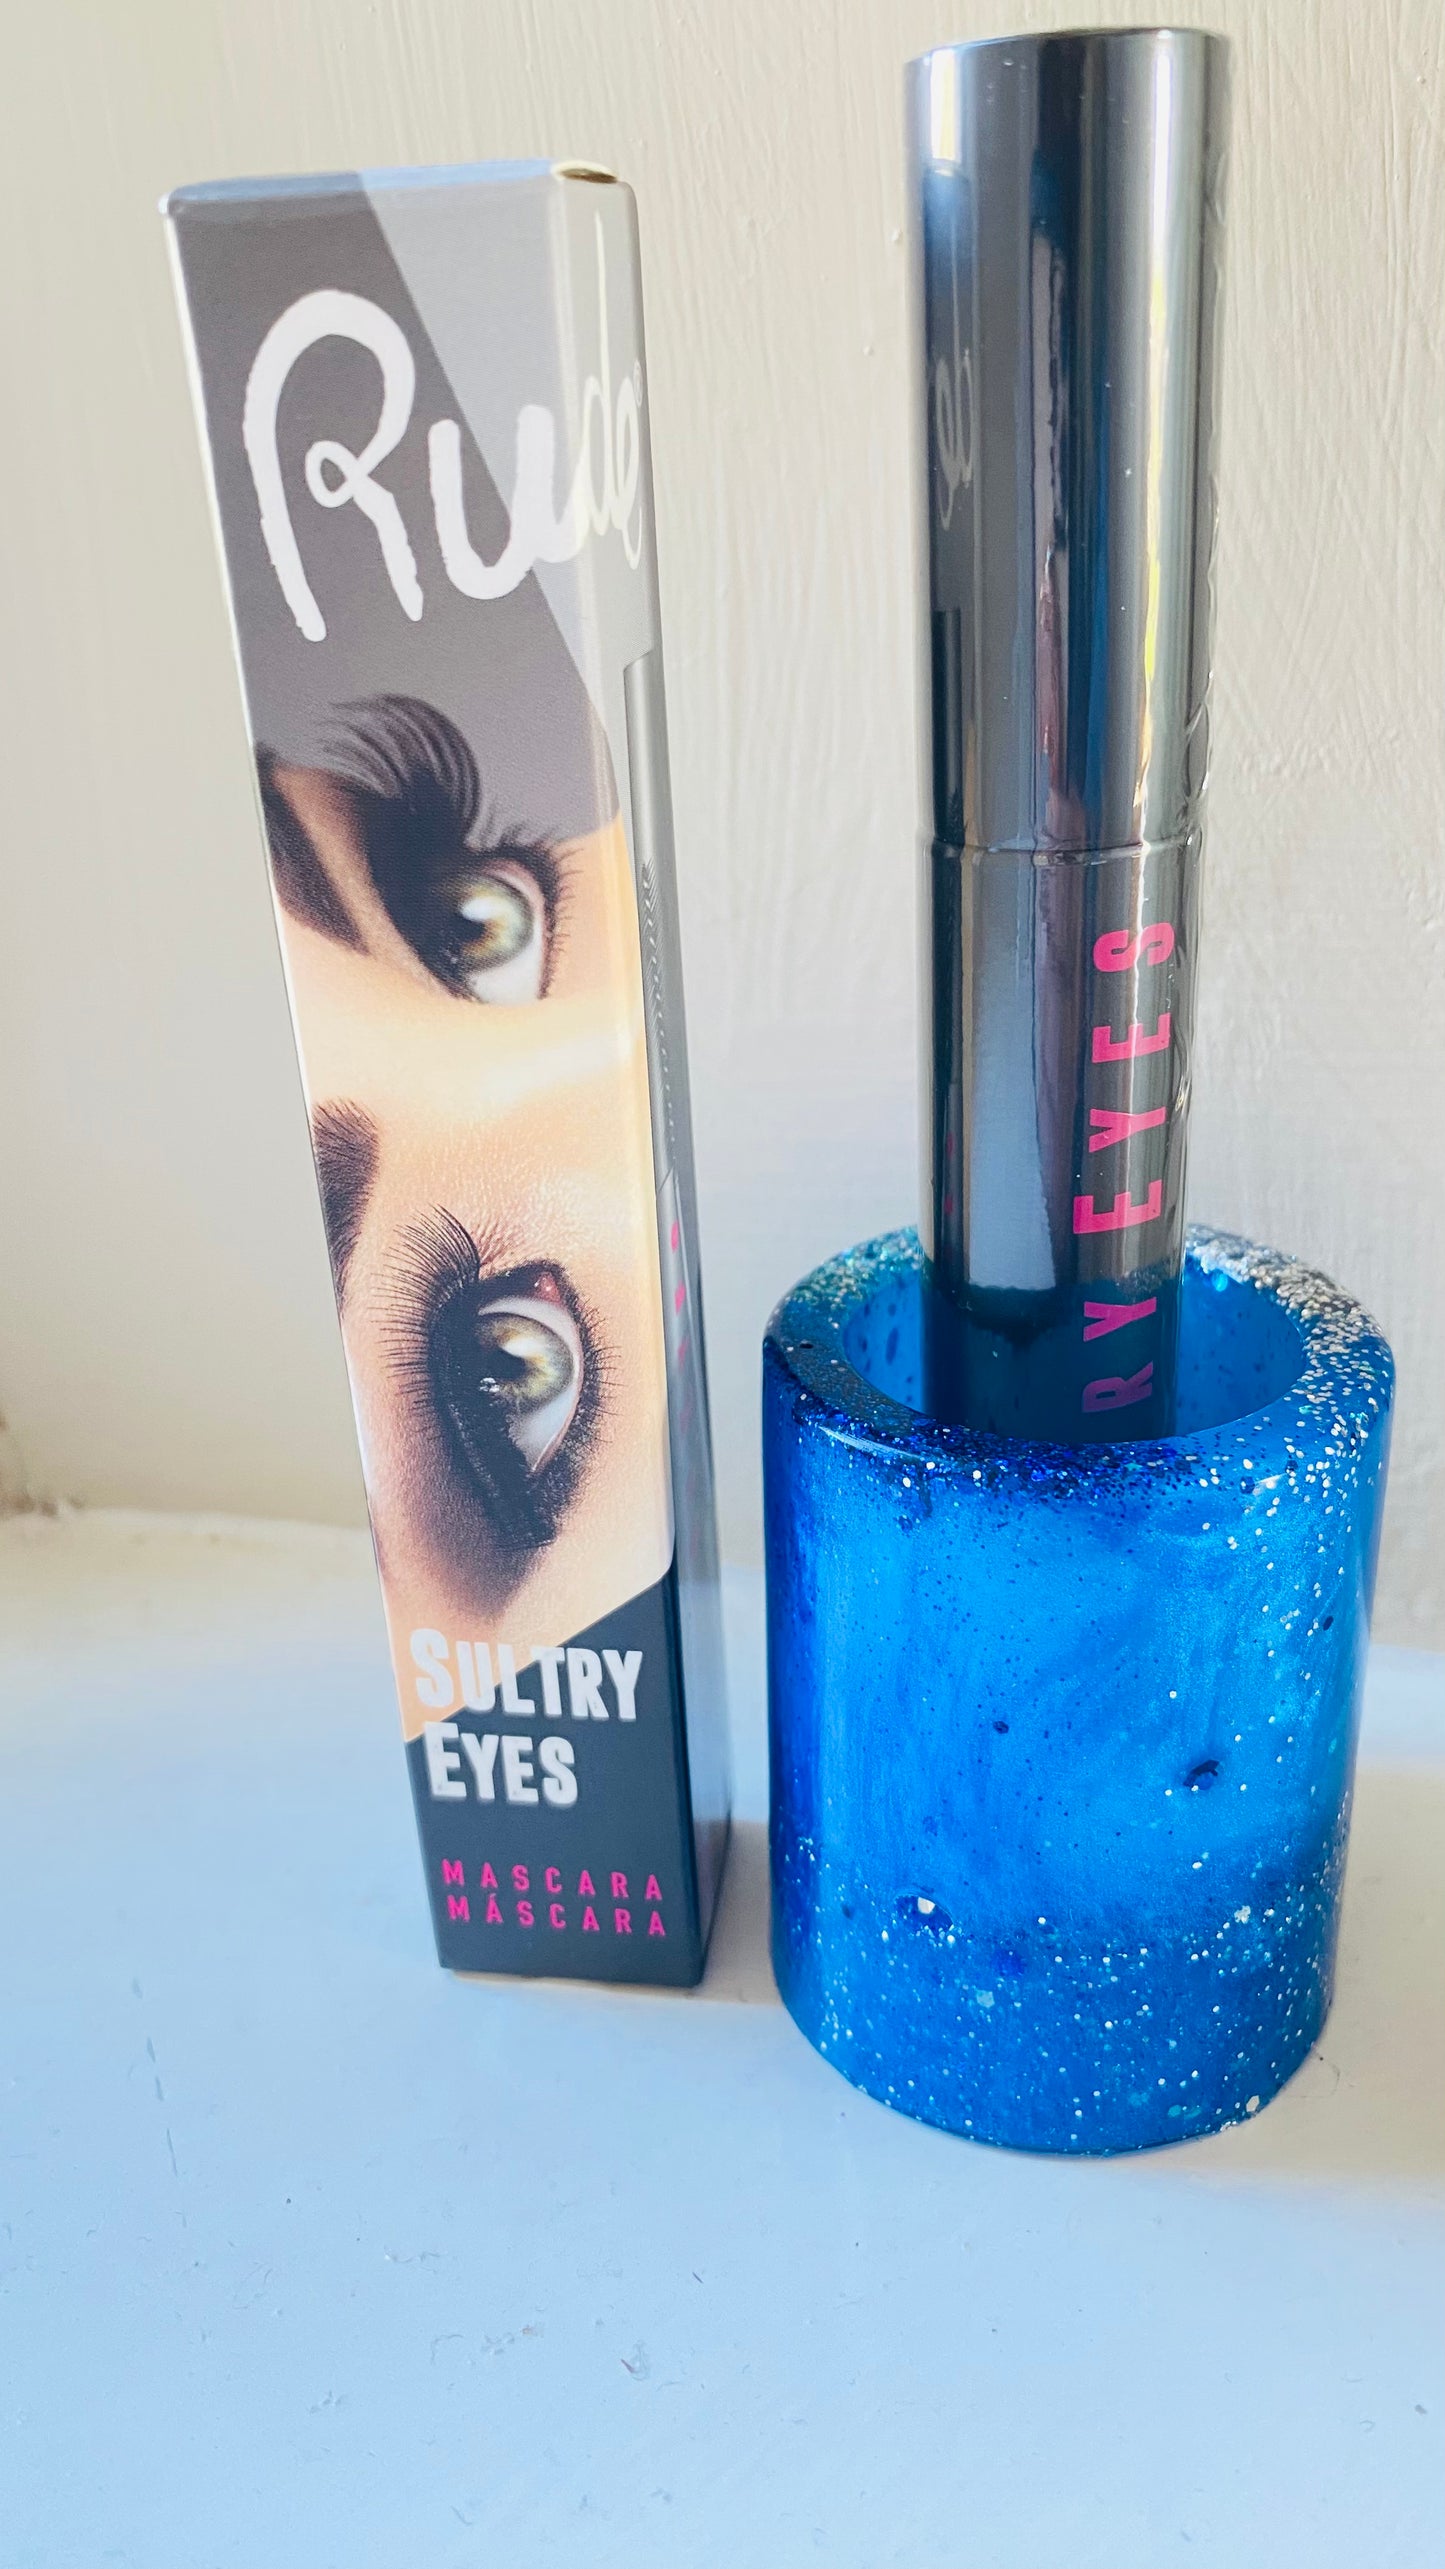 Gorgeous Resin Pot with Stunning Sultry Eyes Mascara DUO